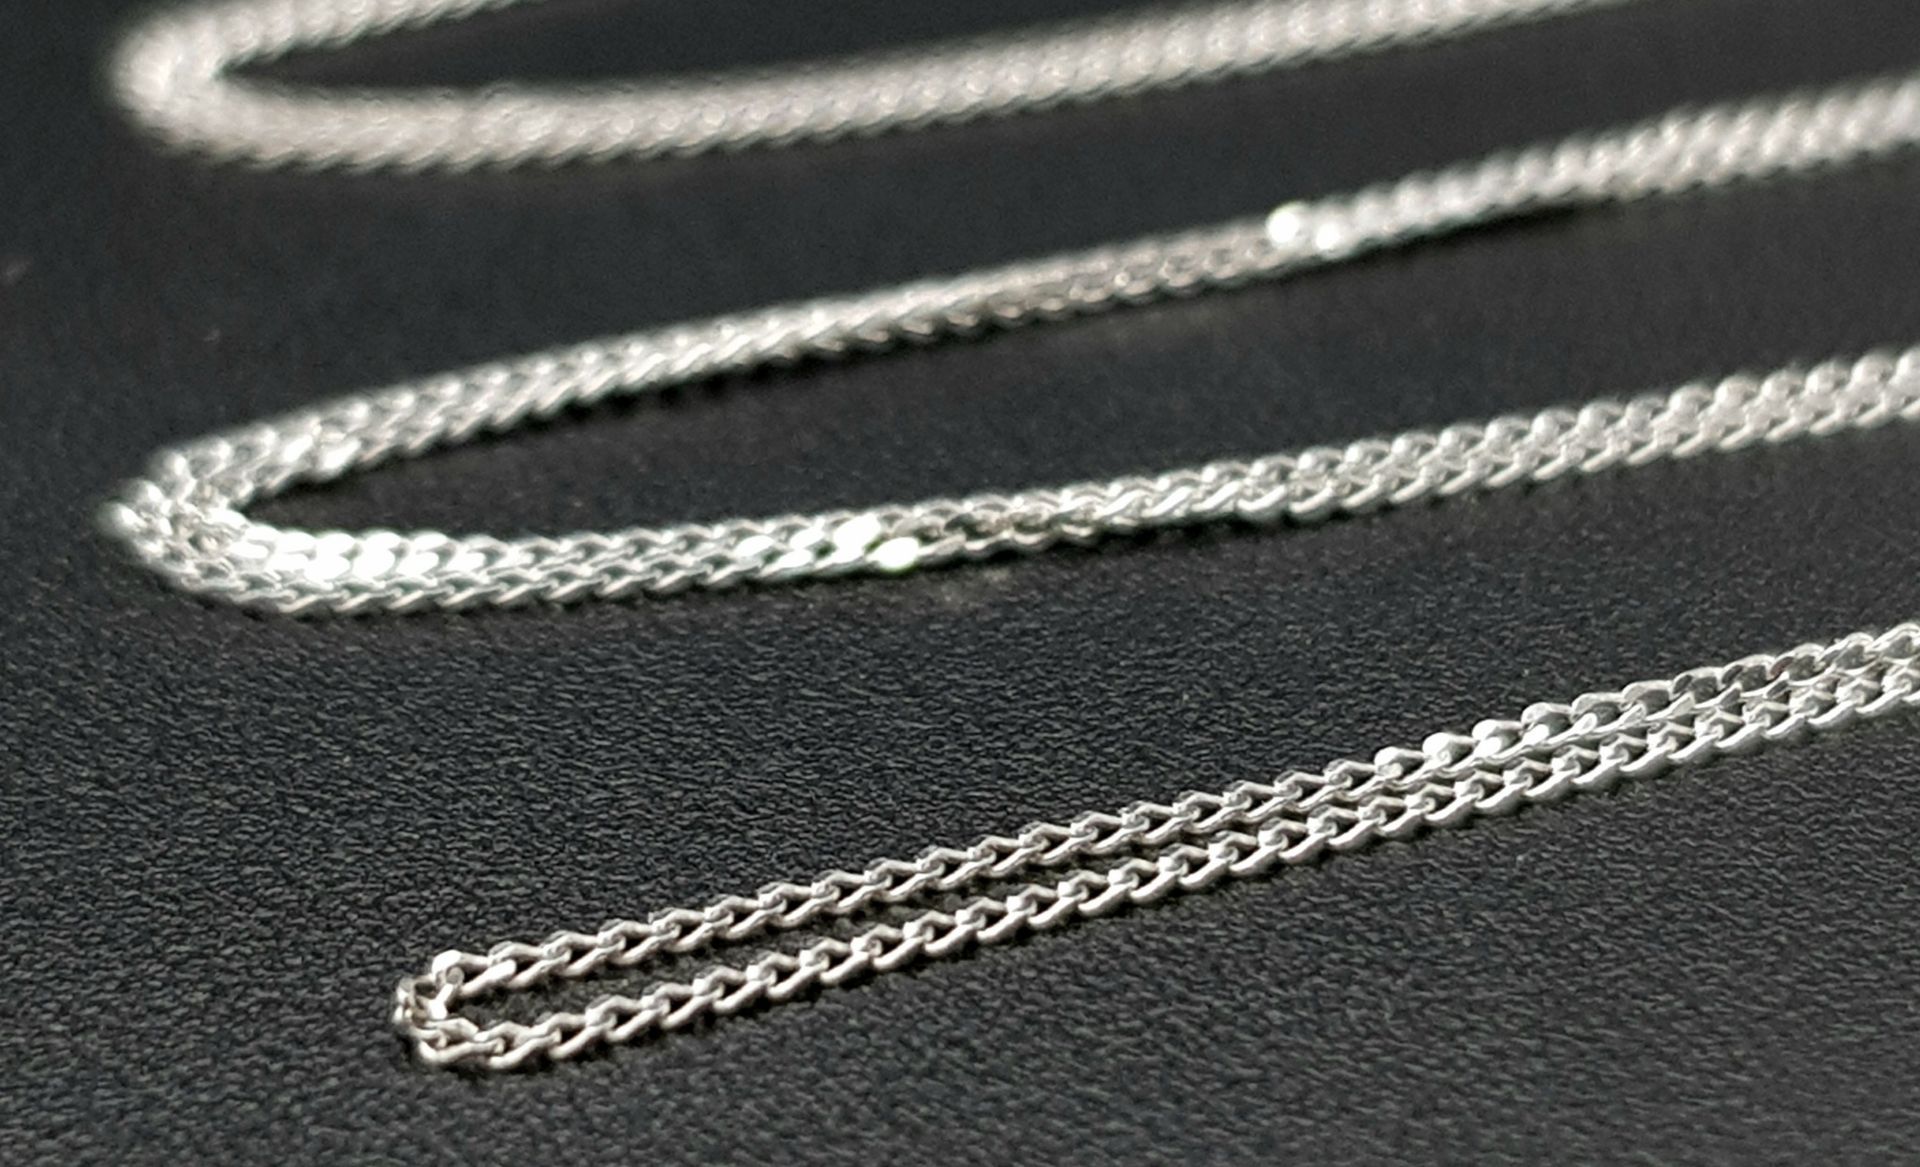 A 9 K white gold disappearing chain necklace, length: 44 cm, weight: 0.5 g. - Image 3 of 4